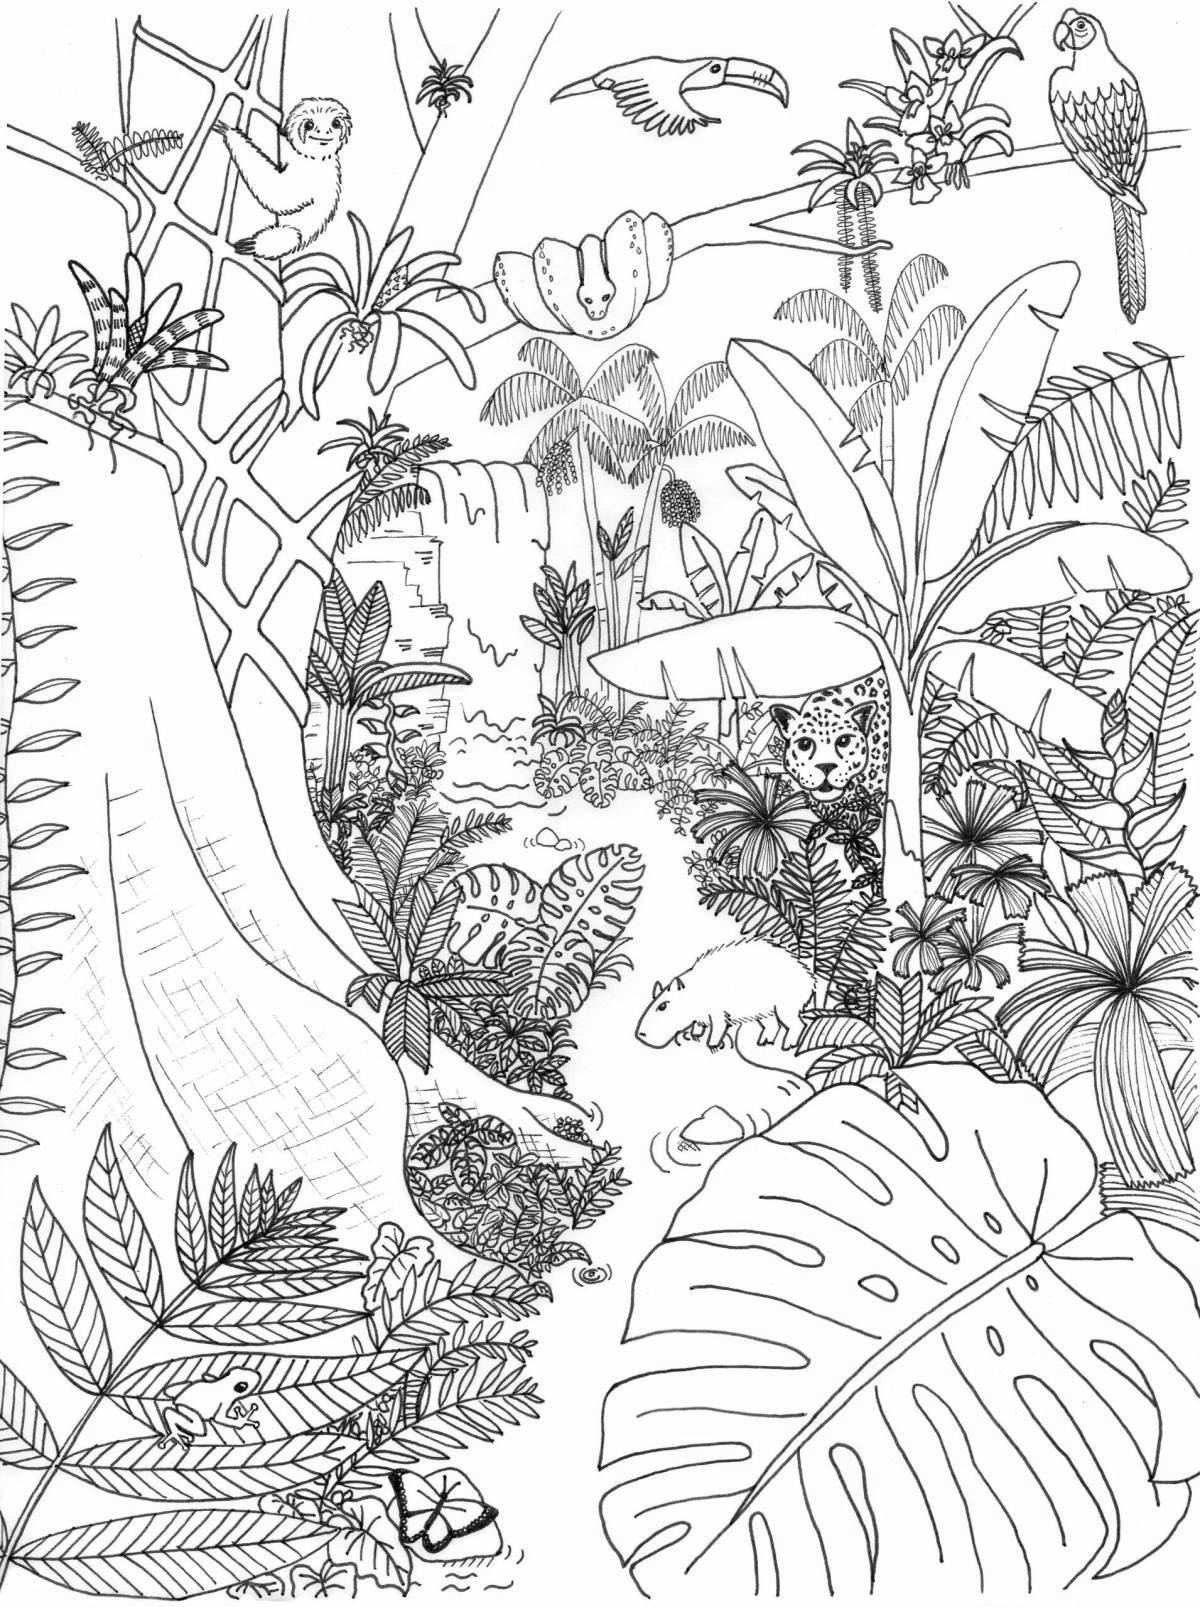 Amazing coloring pages of tropical animals